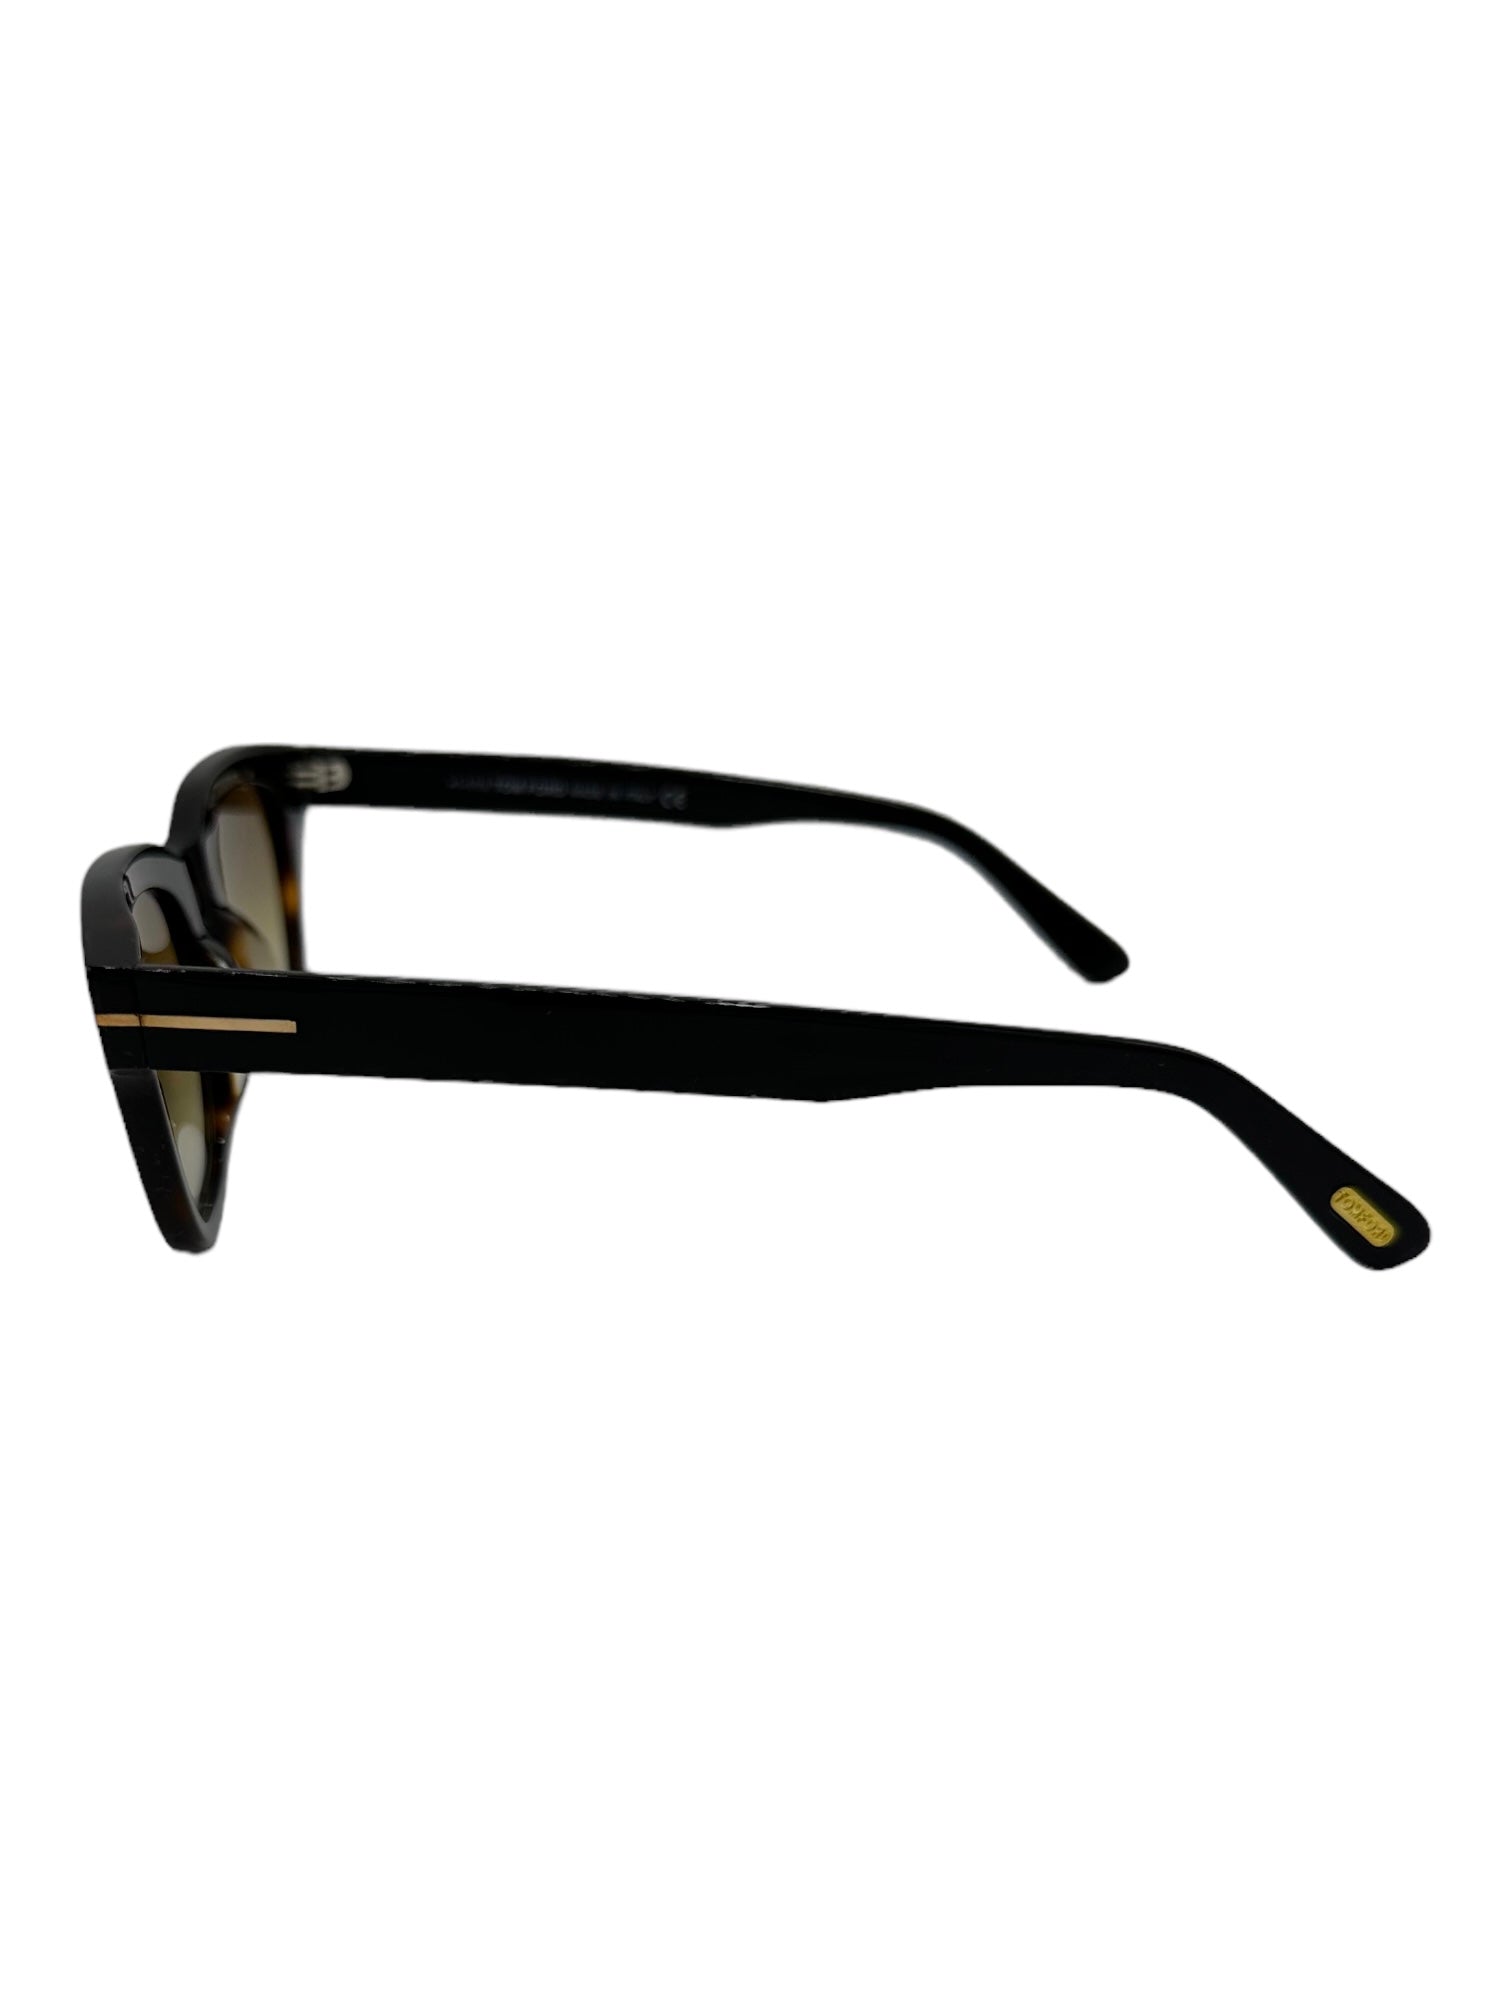 Tom Ford Brown Tortoise Shell Snowdon Sunglasses - Genuine Design Luxury Consignment for Men. New & Pre-Owned Clothing, Shoes, & Accessories. Calgary, Canada